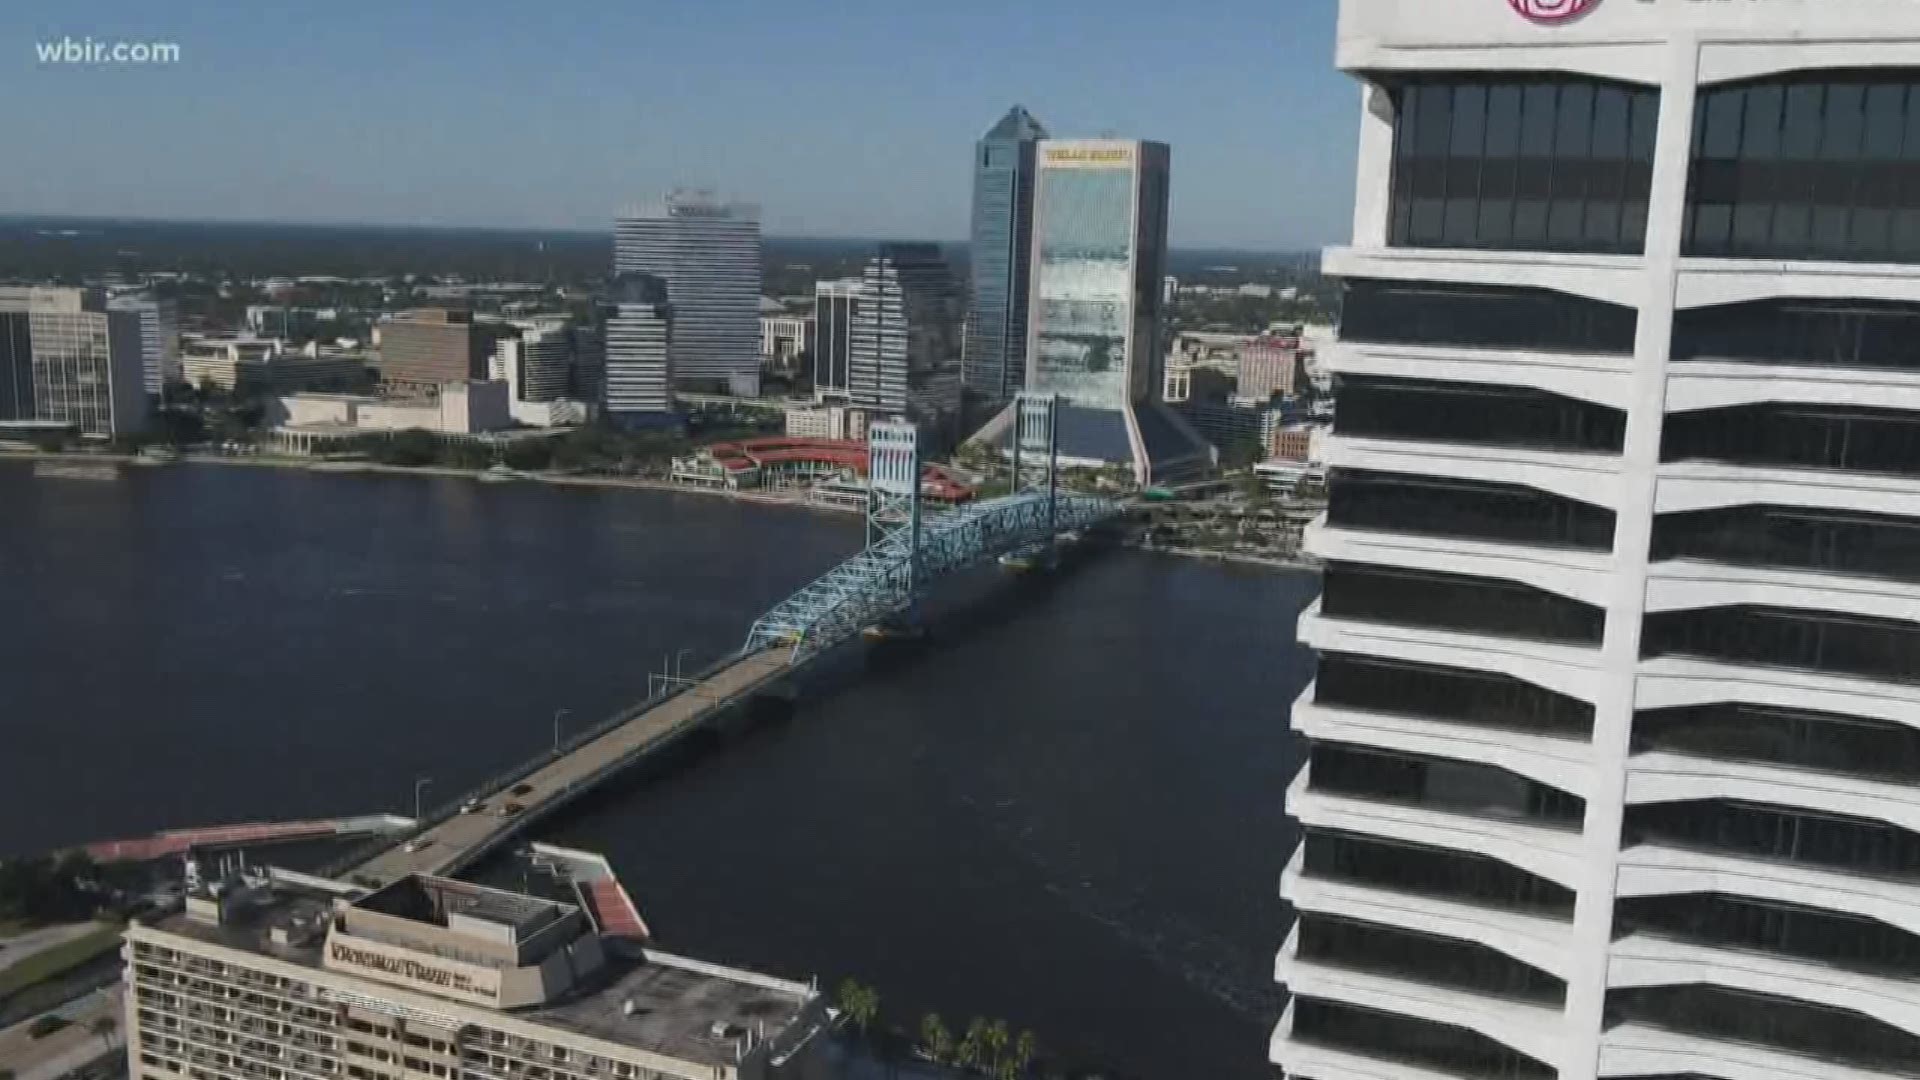 If you're heading down to Florida to cheer on the Vols, the city of Jacksonville has a lot waiting for you to explore.